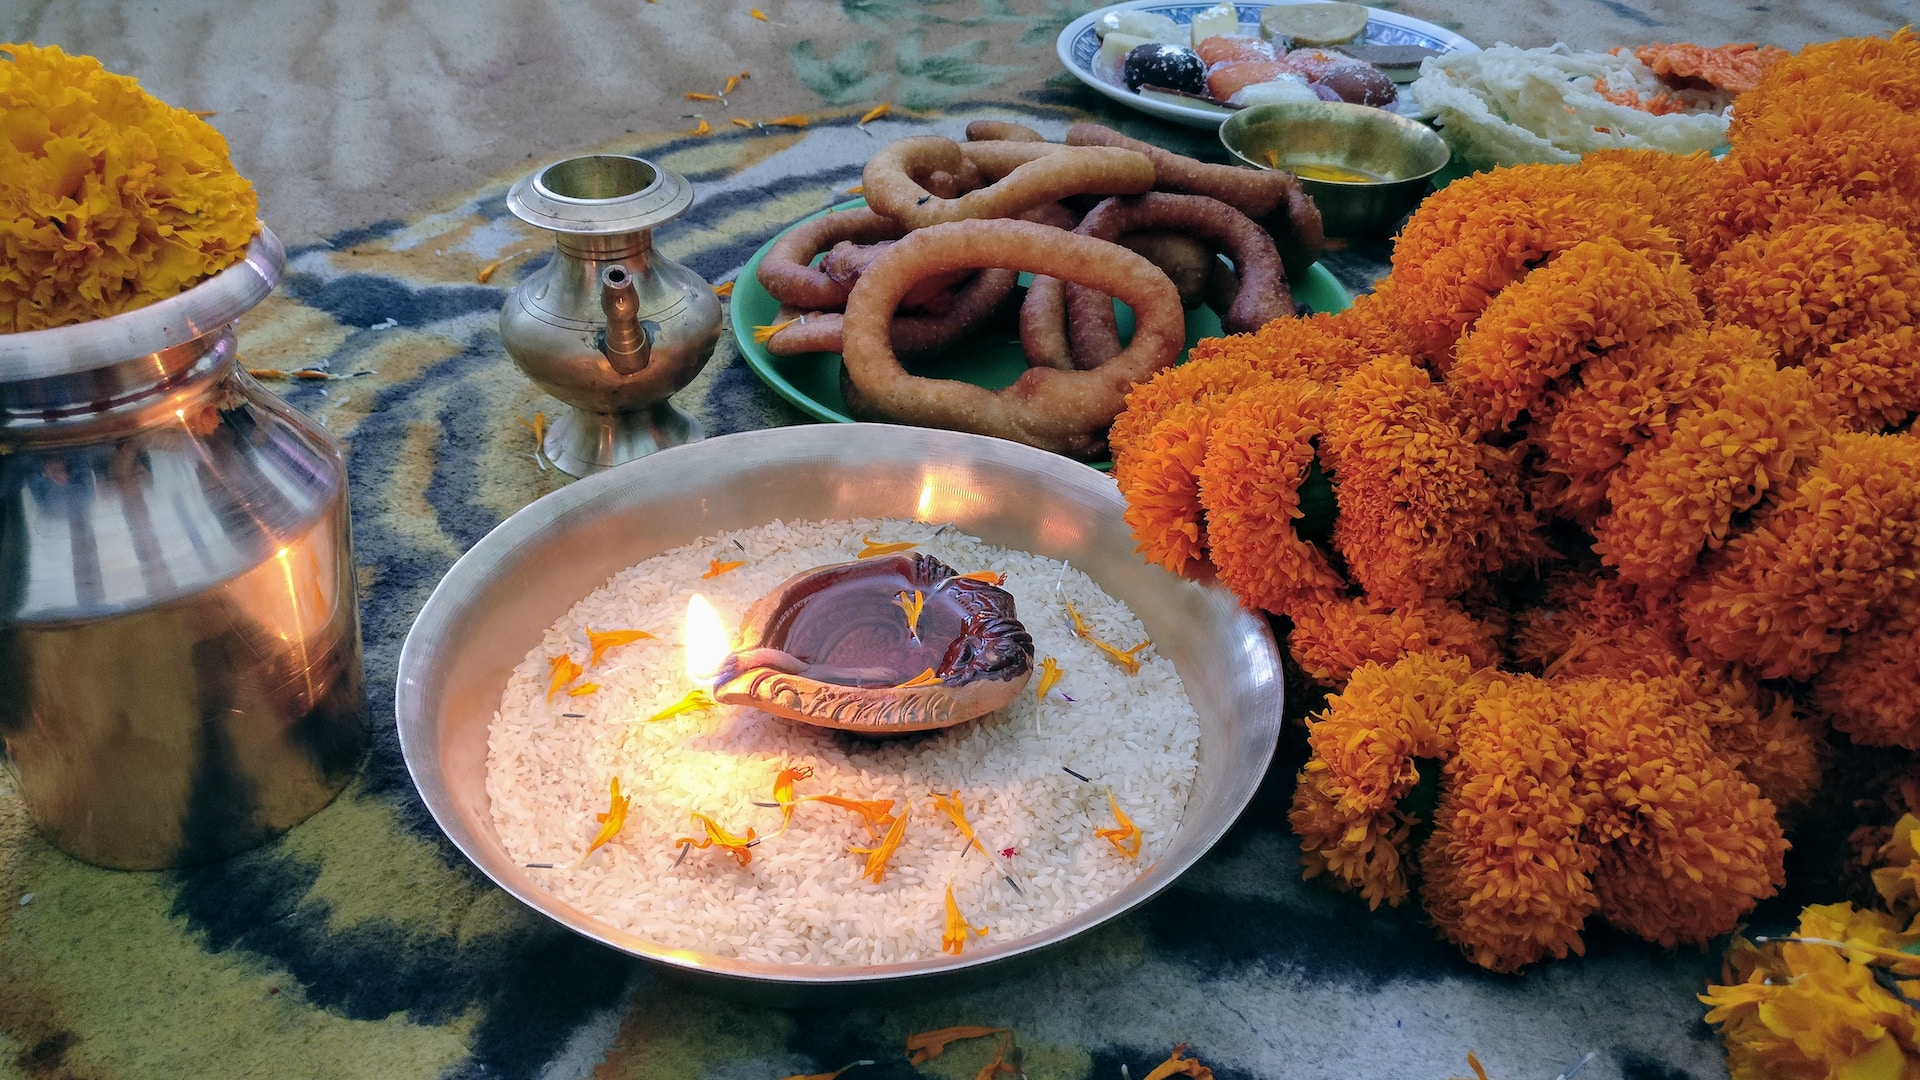 Things you need to know about Tihar